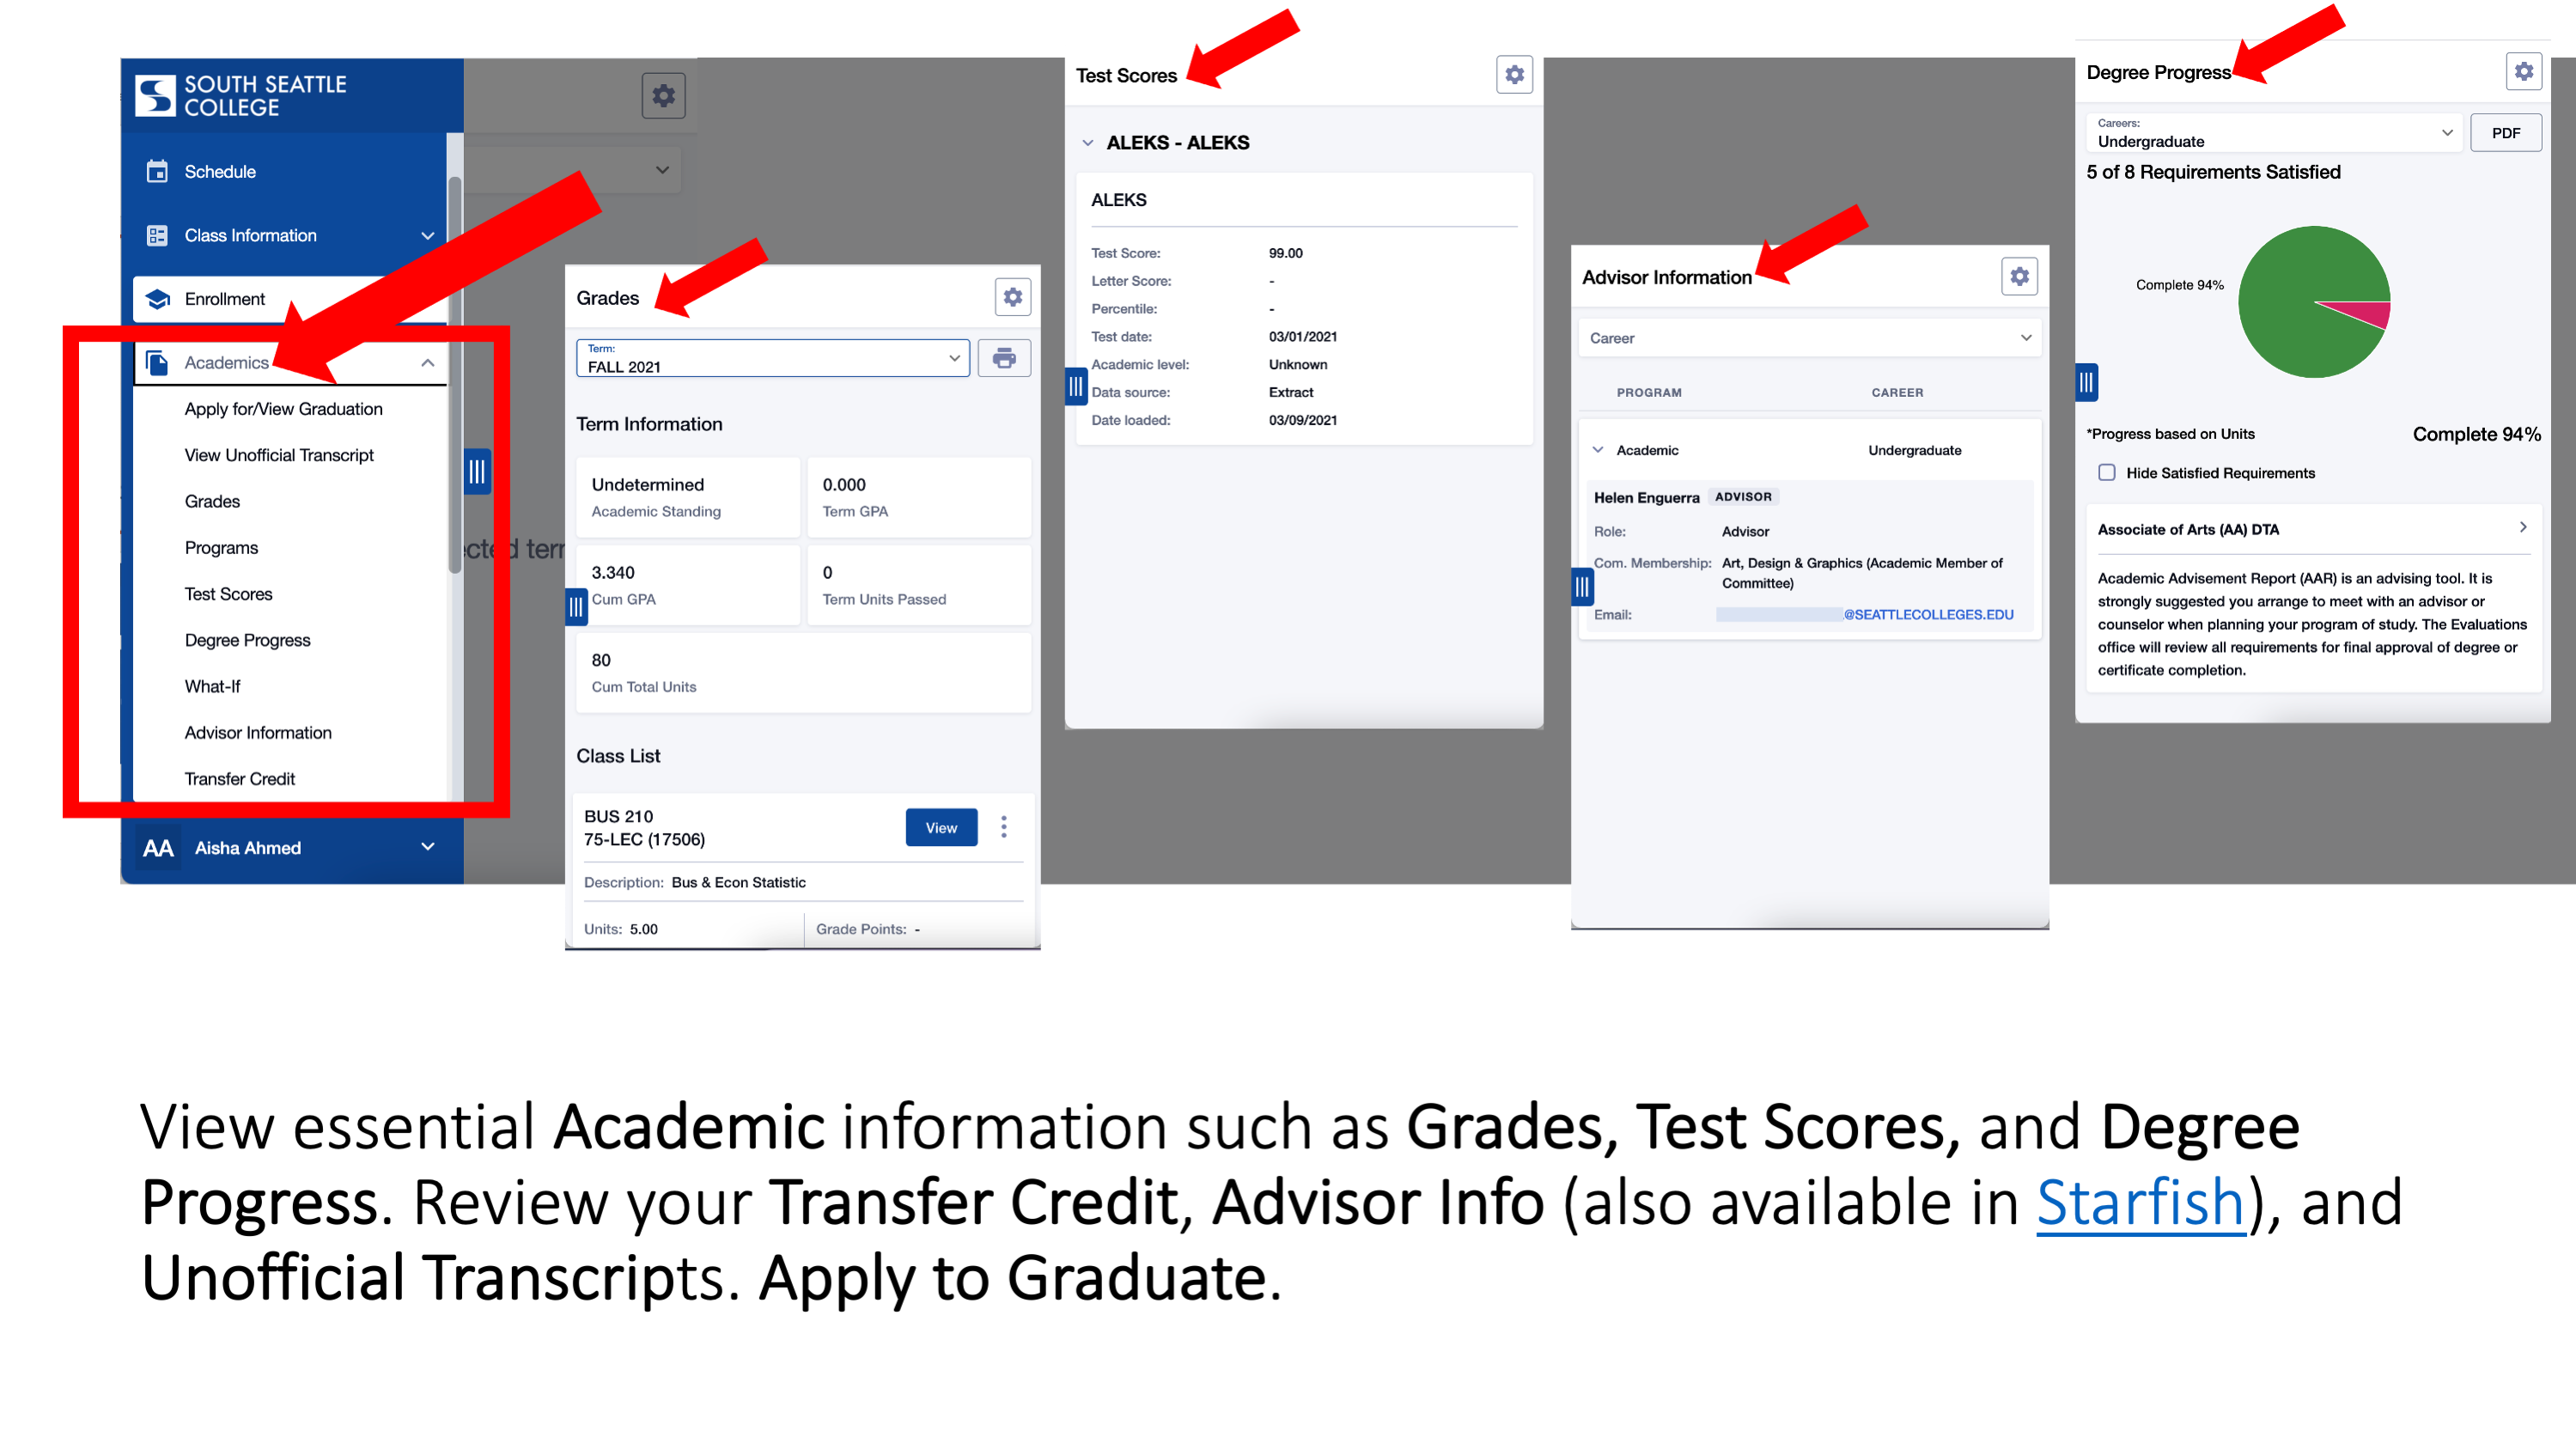 View essential Academic information such as Grades, Test Scores, and Degree Progress. Review your Transfer Credit, Advisor Info (also available in Starfish), and Unofficial Transcripts. Apply to Graduate.